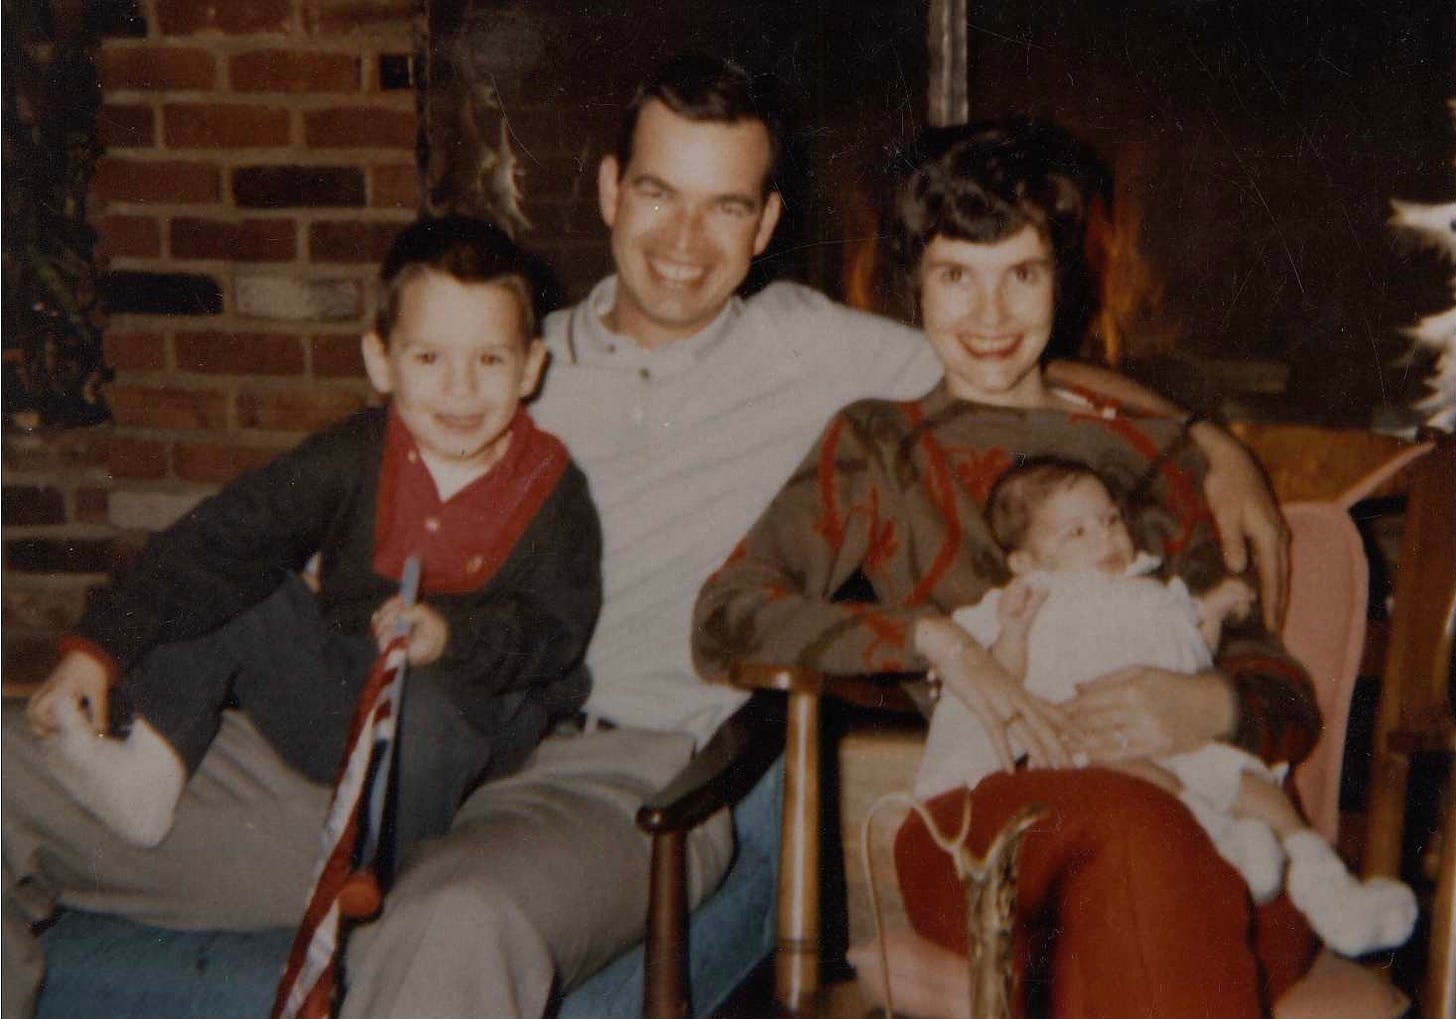 Image of author as an infant with family, Bud, Janet and Brian in 1964